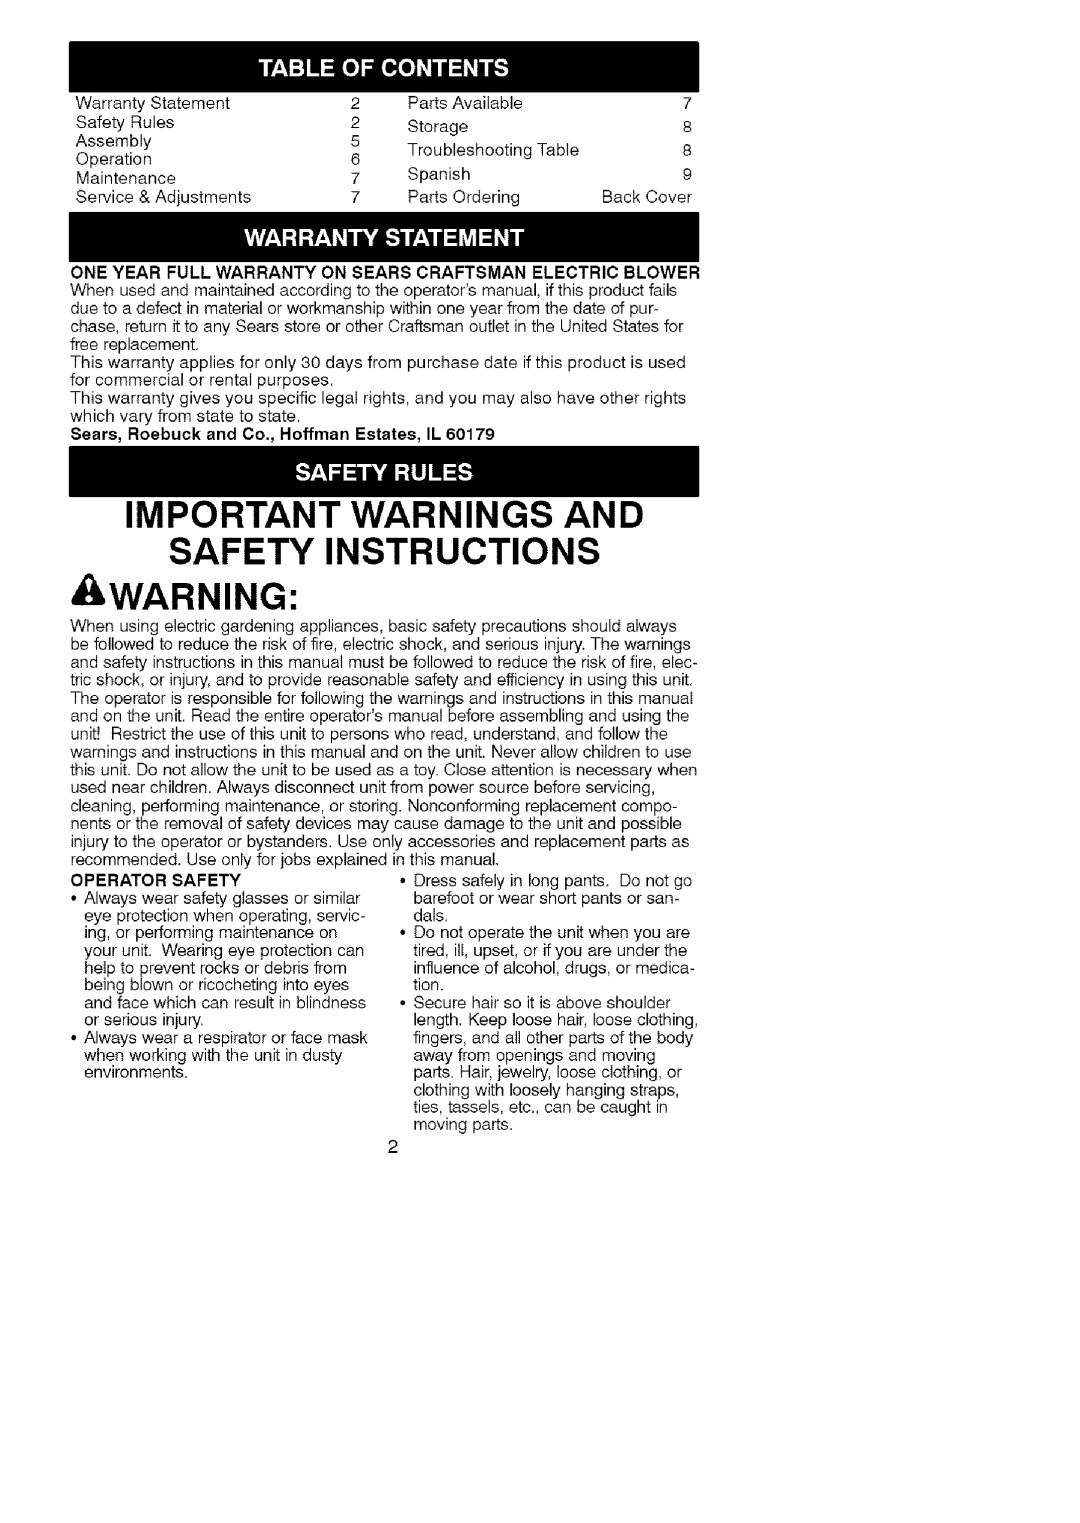 Craftsman 358.799343 Important Warnings And Safety Instructions, Awarning, Sears, Roebuck and Co., Hoffman Estates, IL 